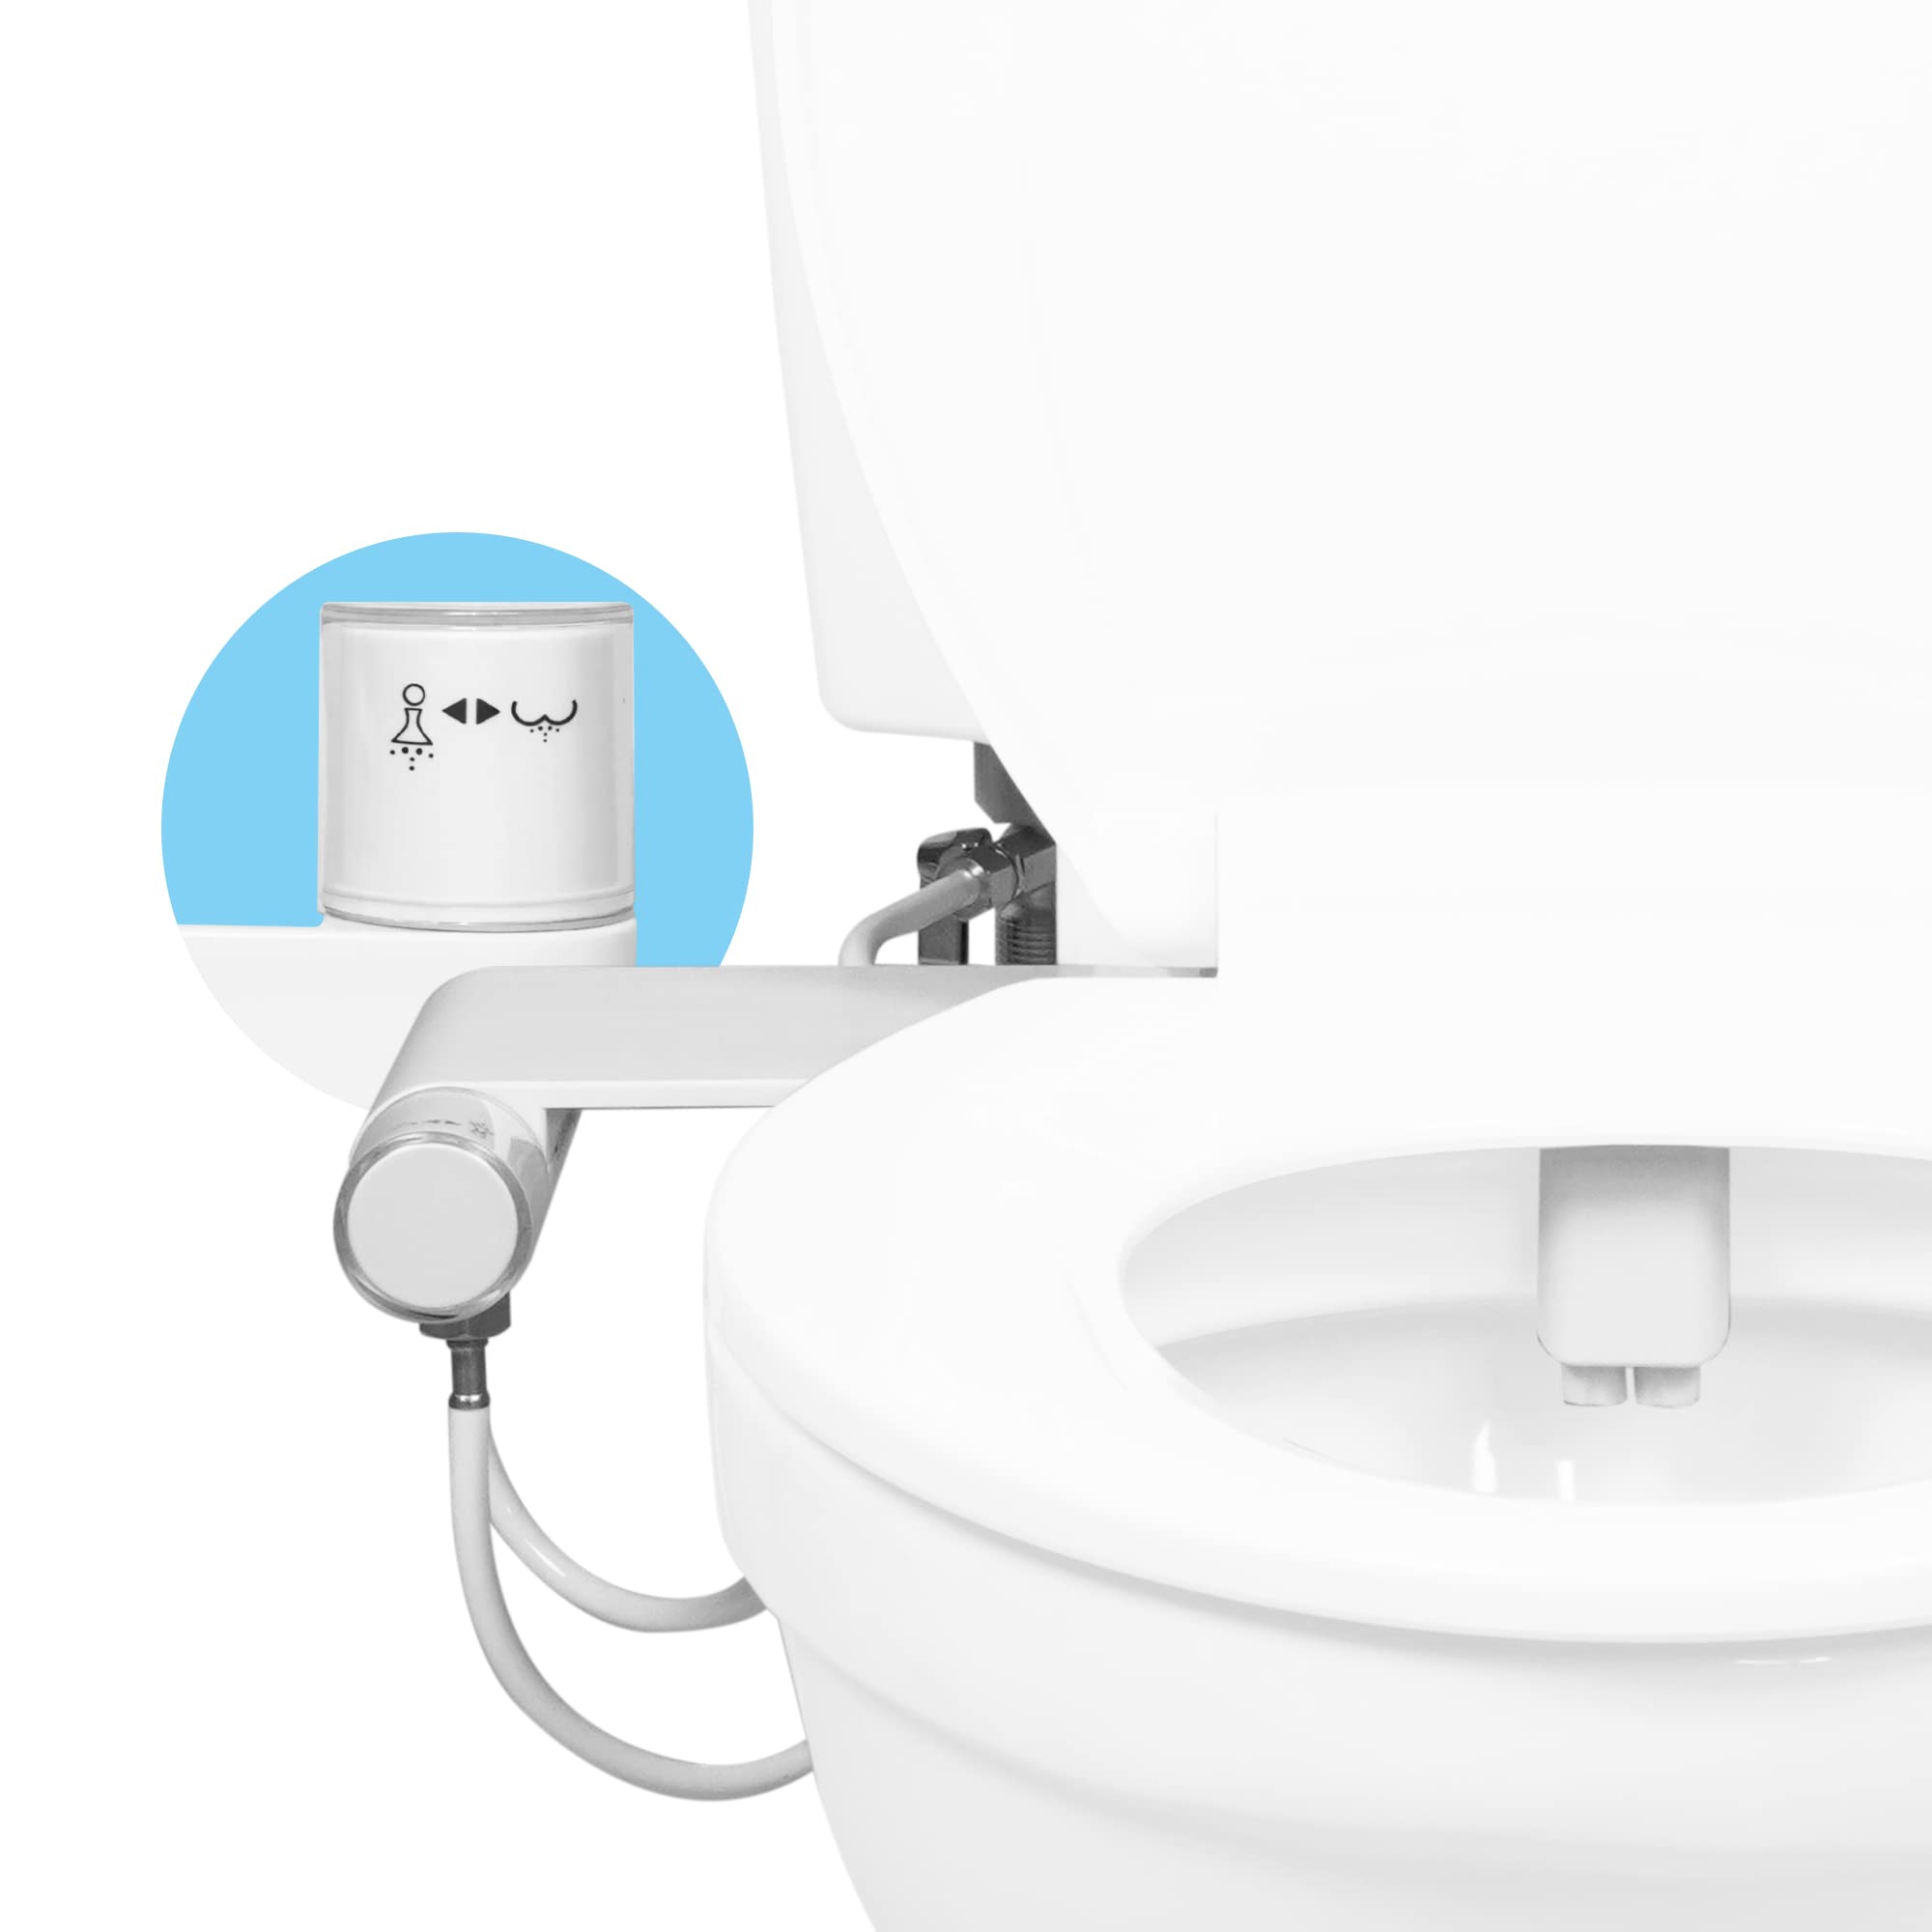 Book Cover GenieBidet Rear & Feminine Ultra Thin Bidet Attachment for Toilet with Self Cleaning Dual Nozzles - No Wiring Needed - Easy 15 Minute Install. Hybrid Brass 3-way T with ON/OFF [Travel Bidet Included]